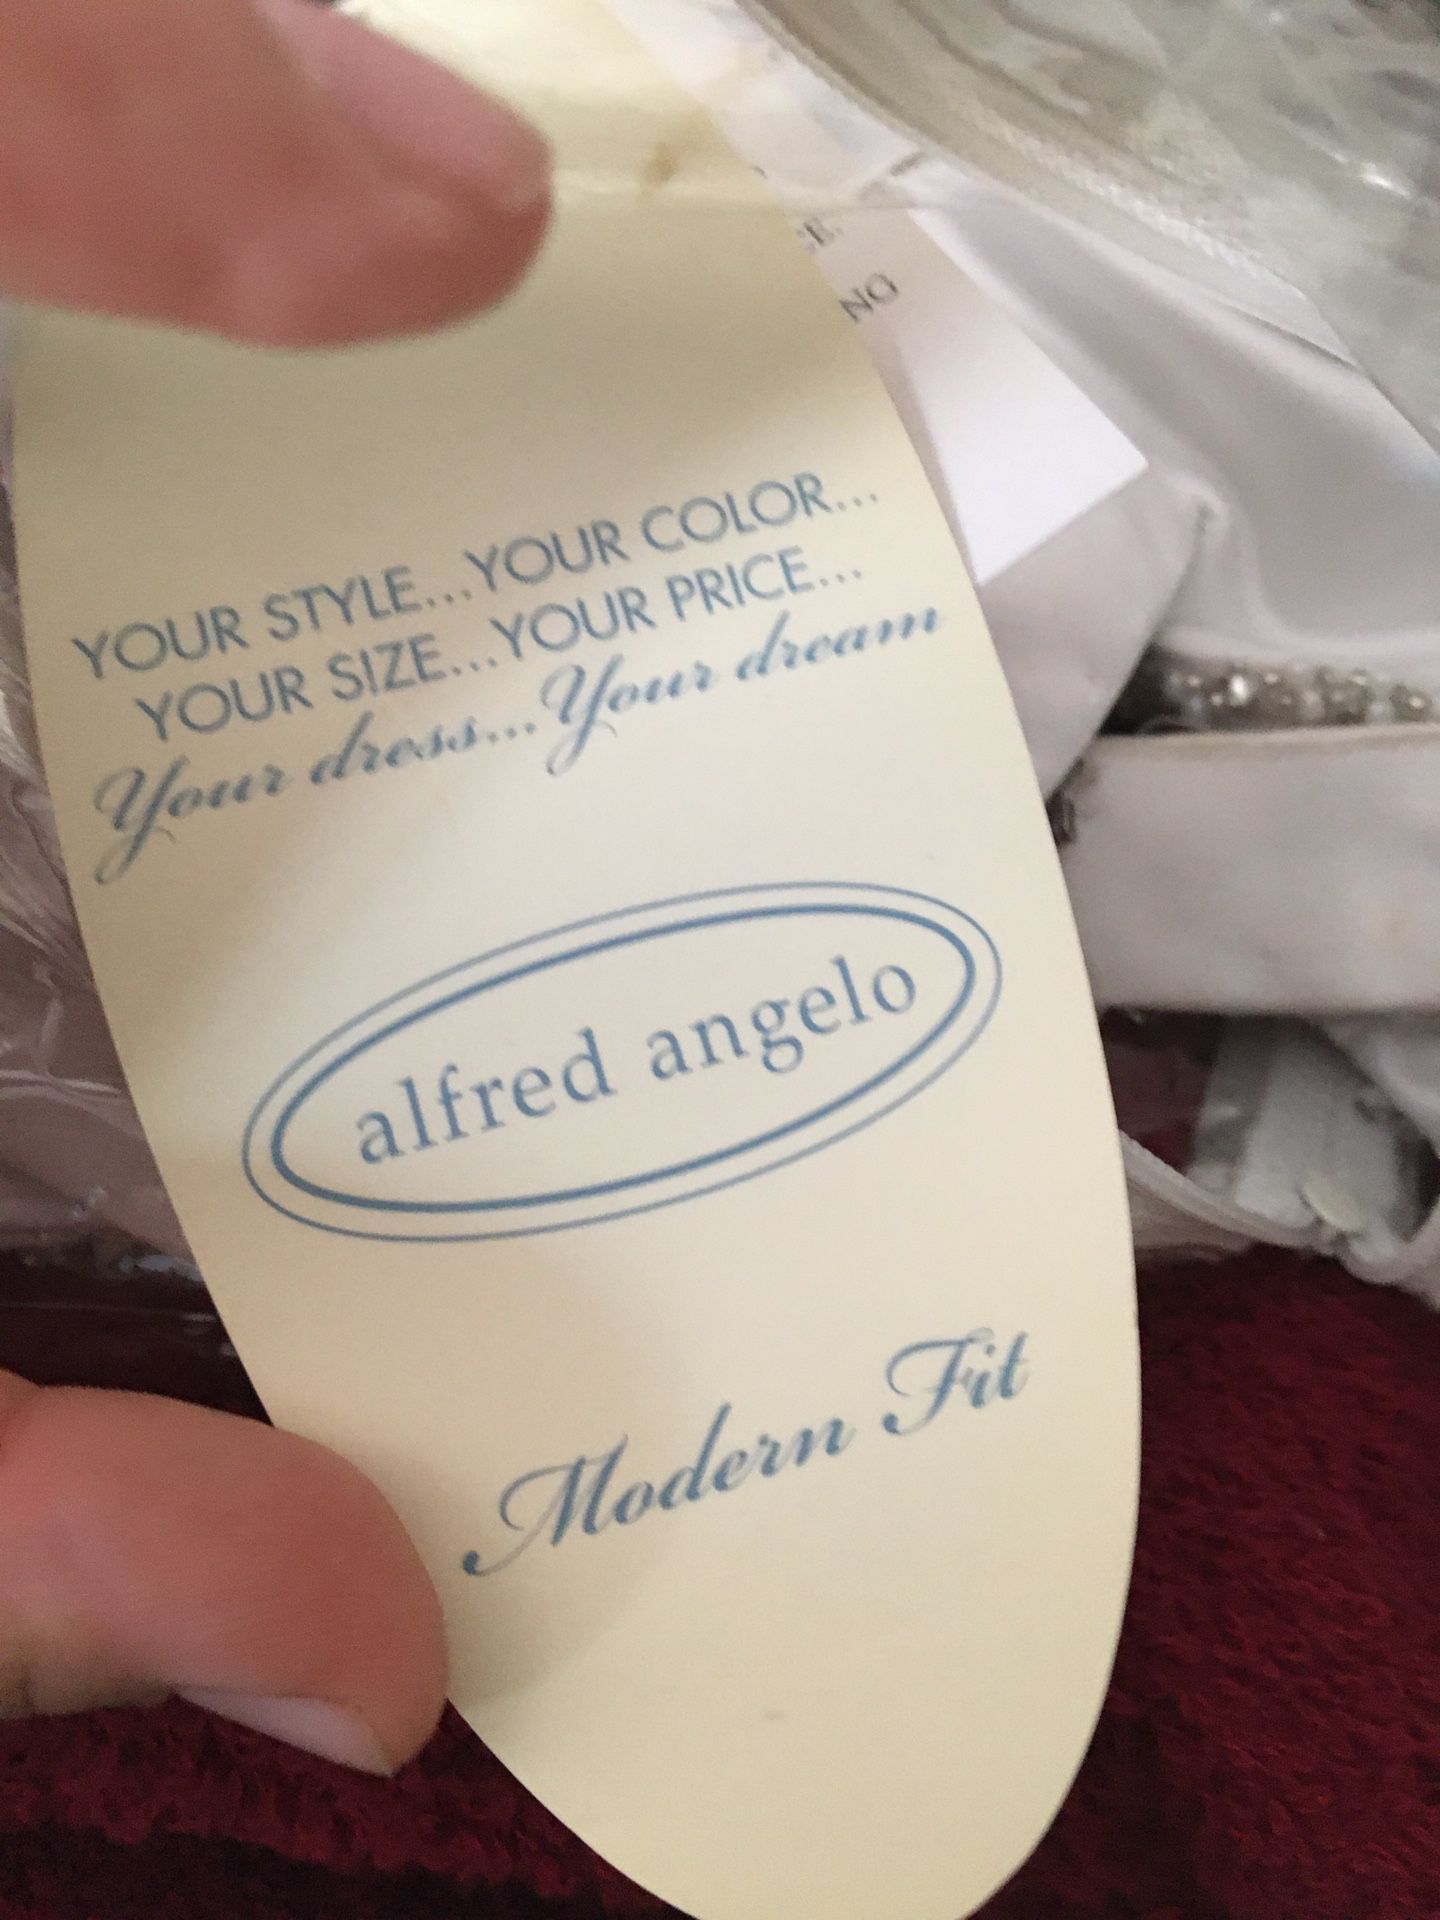 NEW Alfred Angelo wedding dress! Priced for quick sale!!